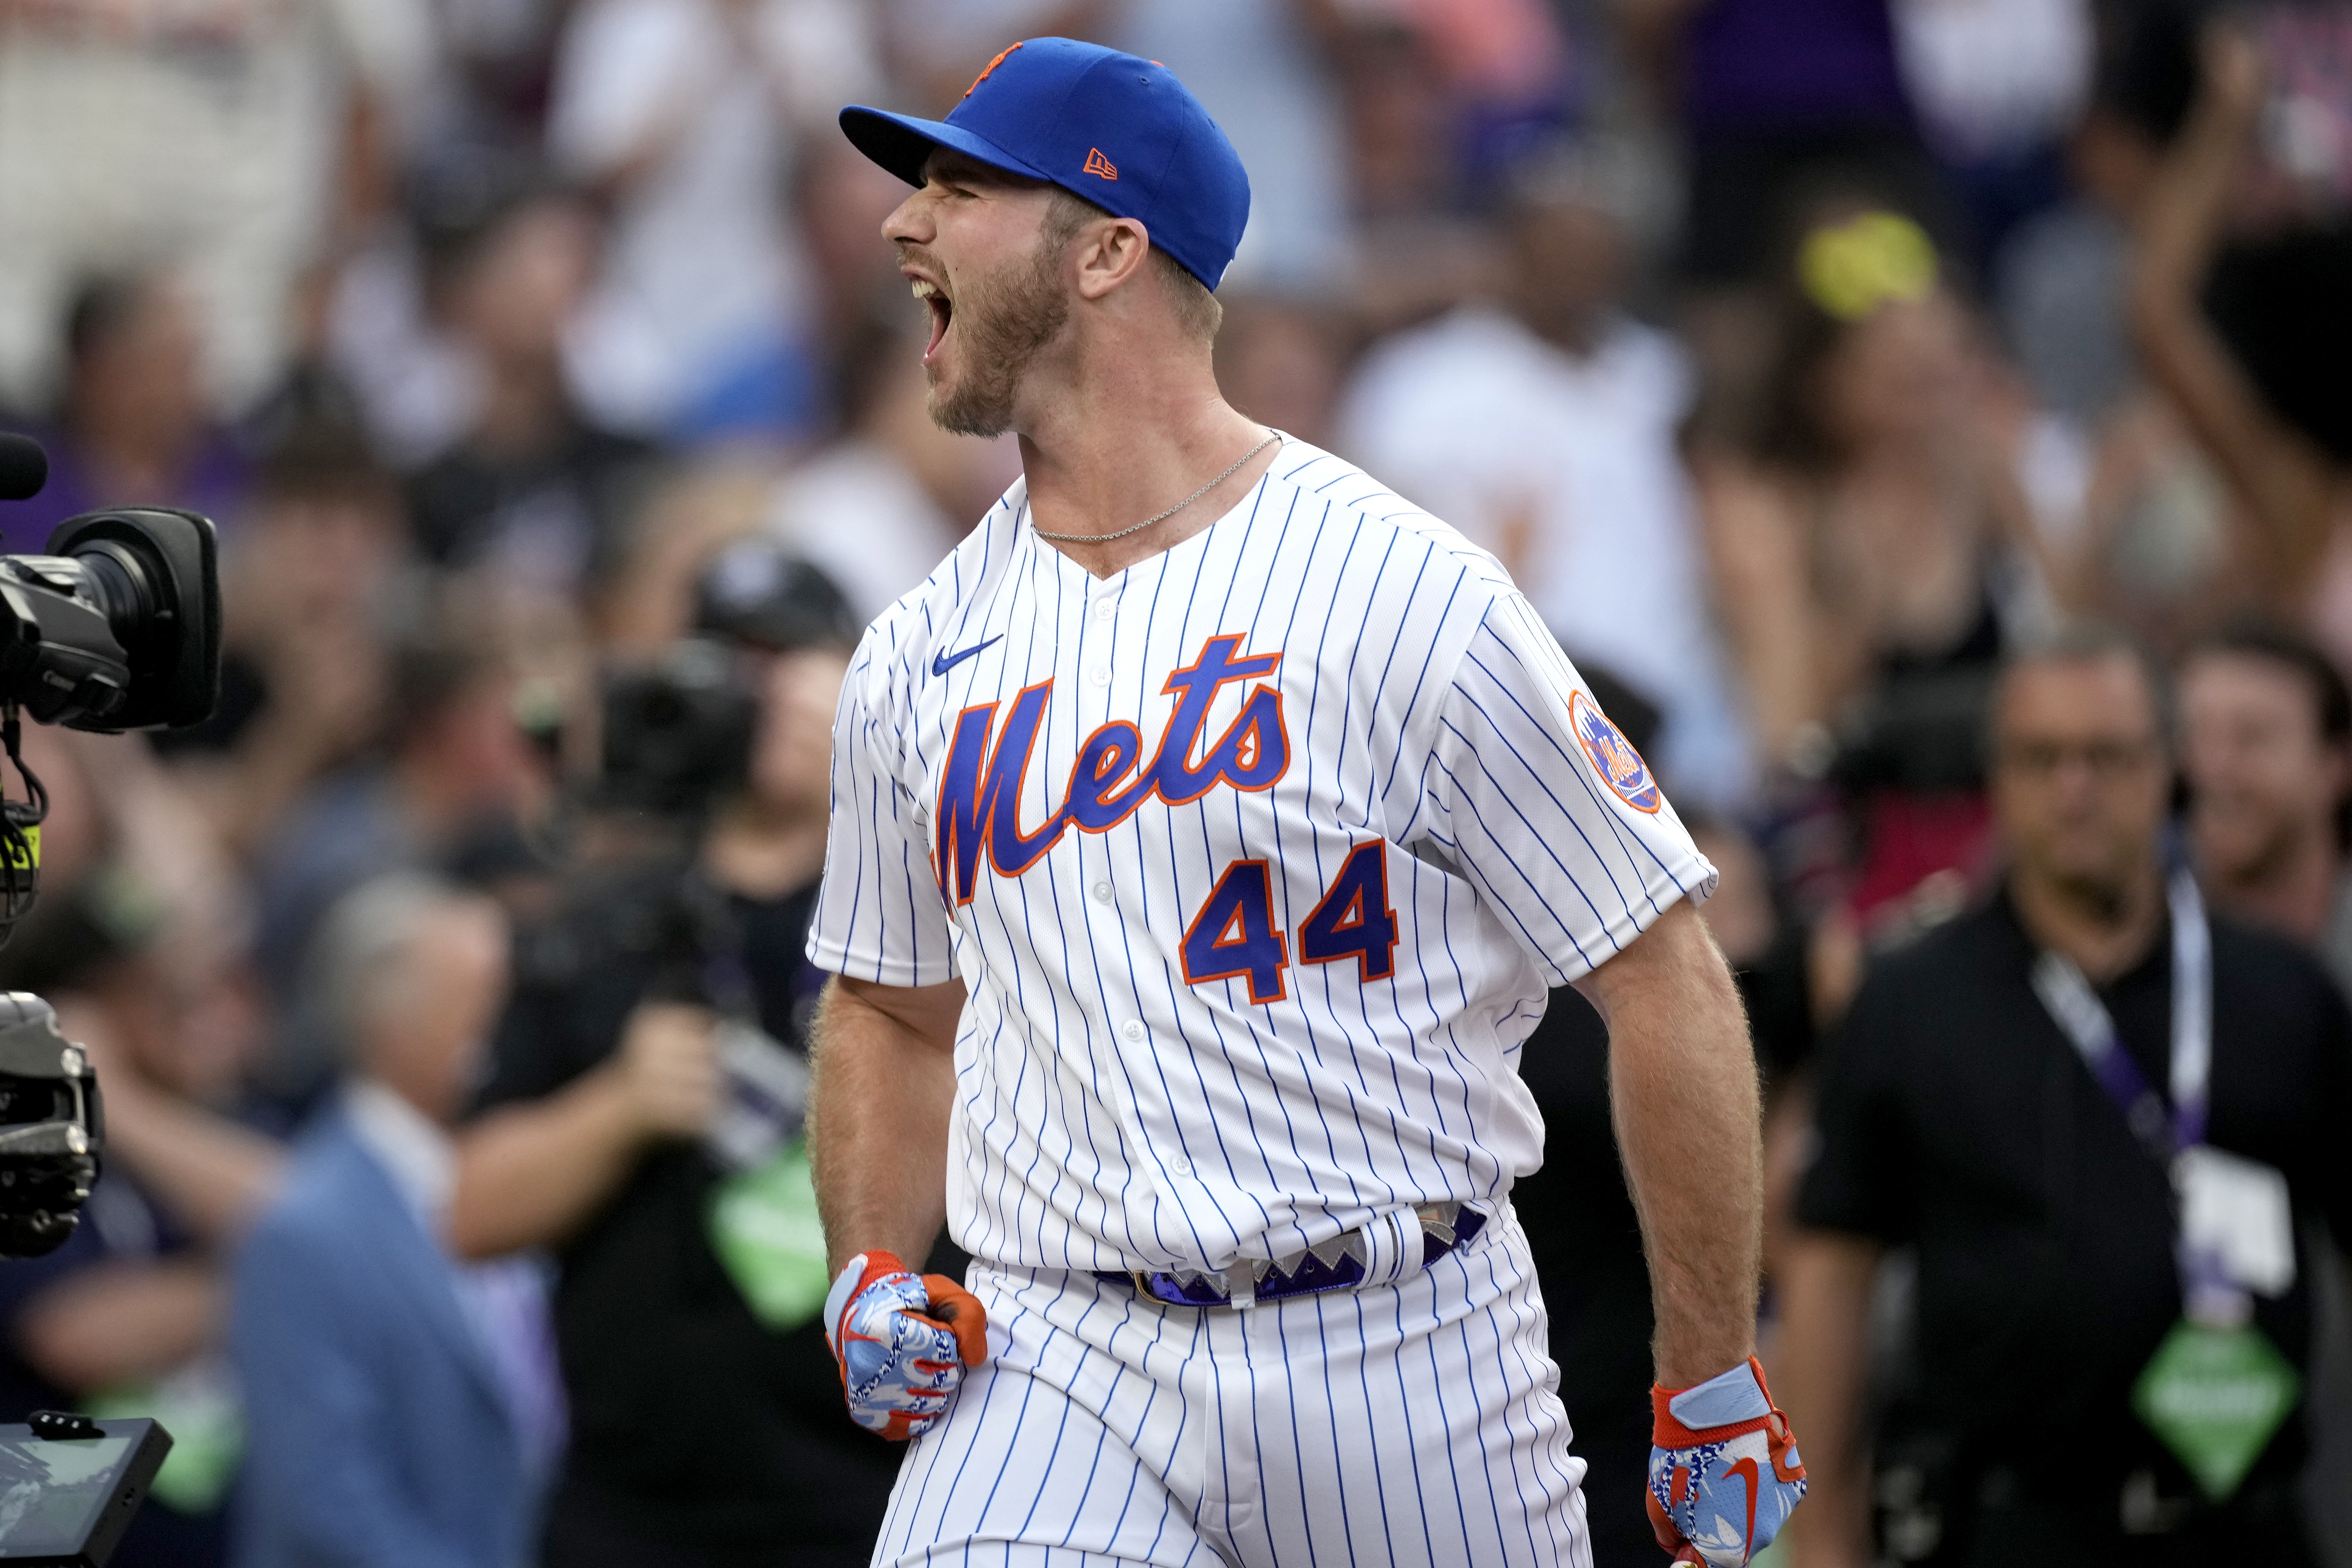 Home Run Derby 2021: Mets' Pete Alonso defends title after record